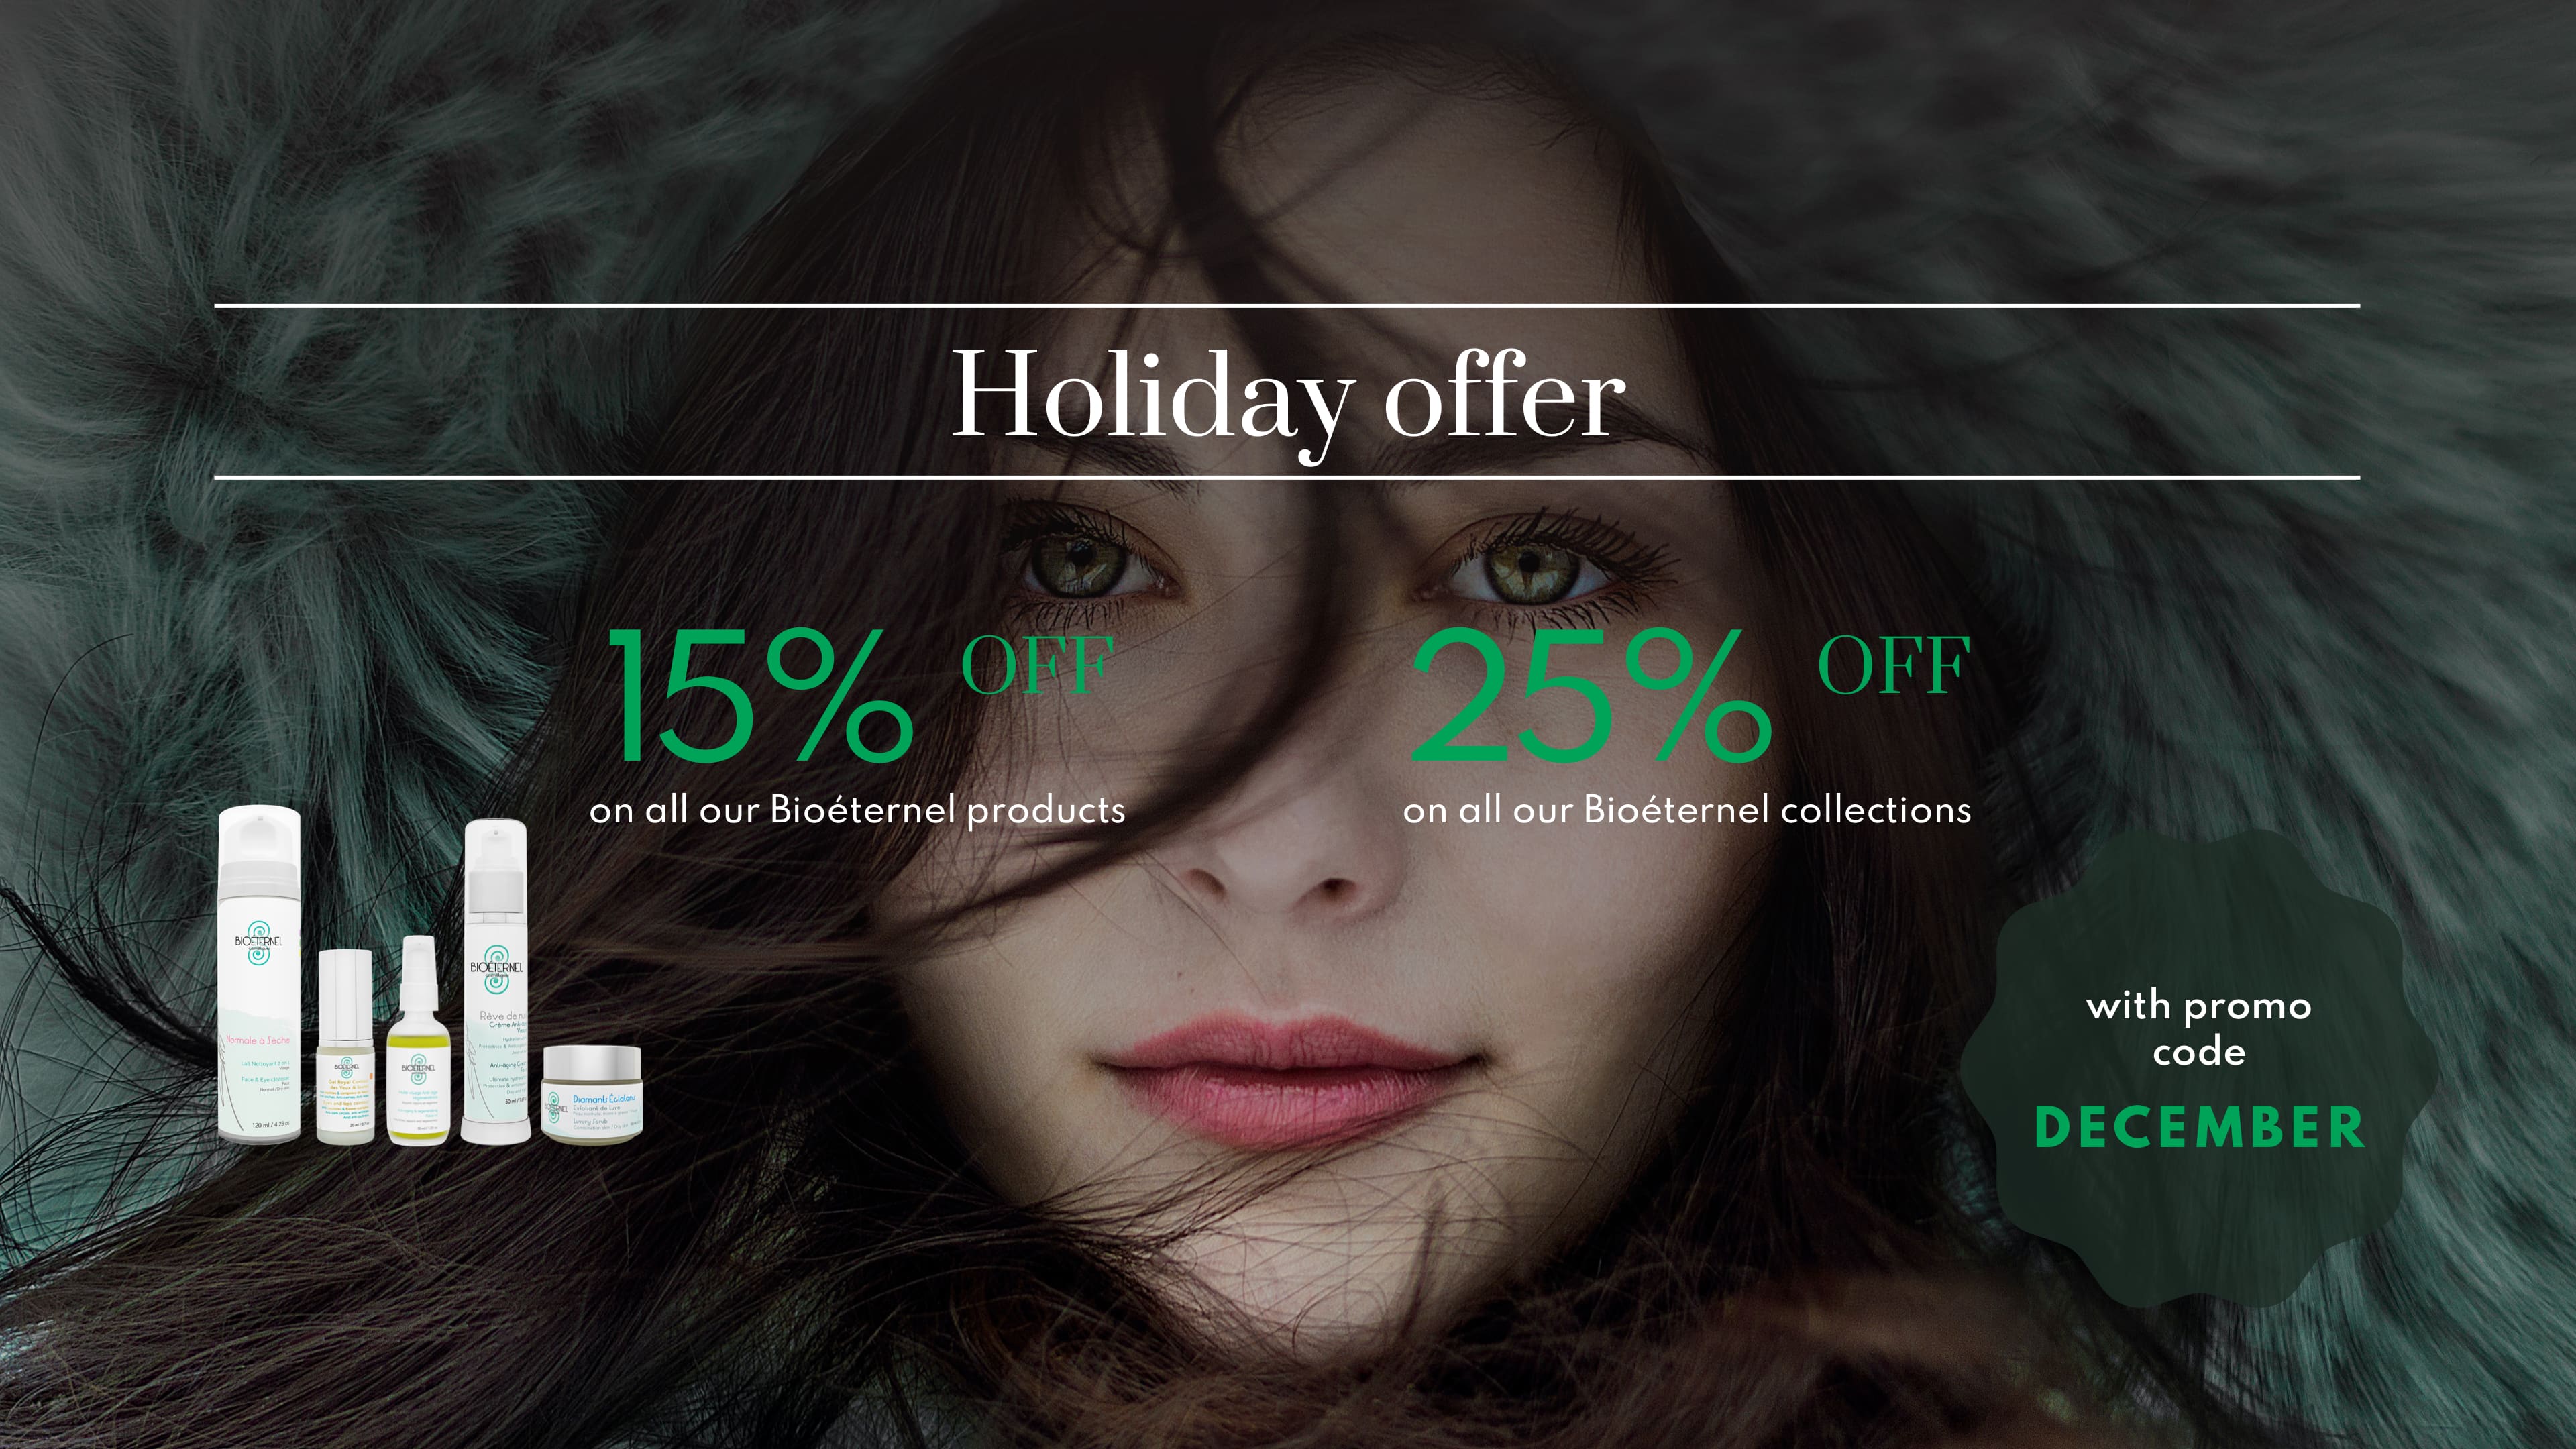 Holiday offer - 15% off all our Bioéternel products - 25% off all our Bioéternel sets with promo code DECEMBER